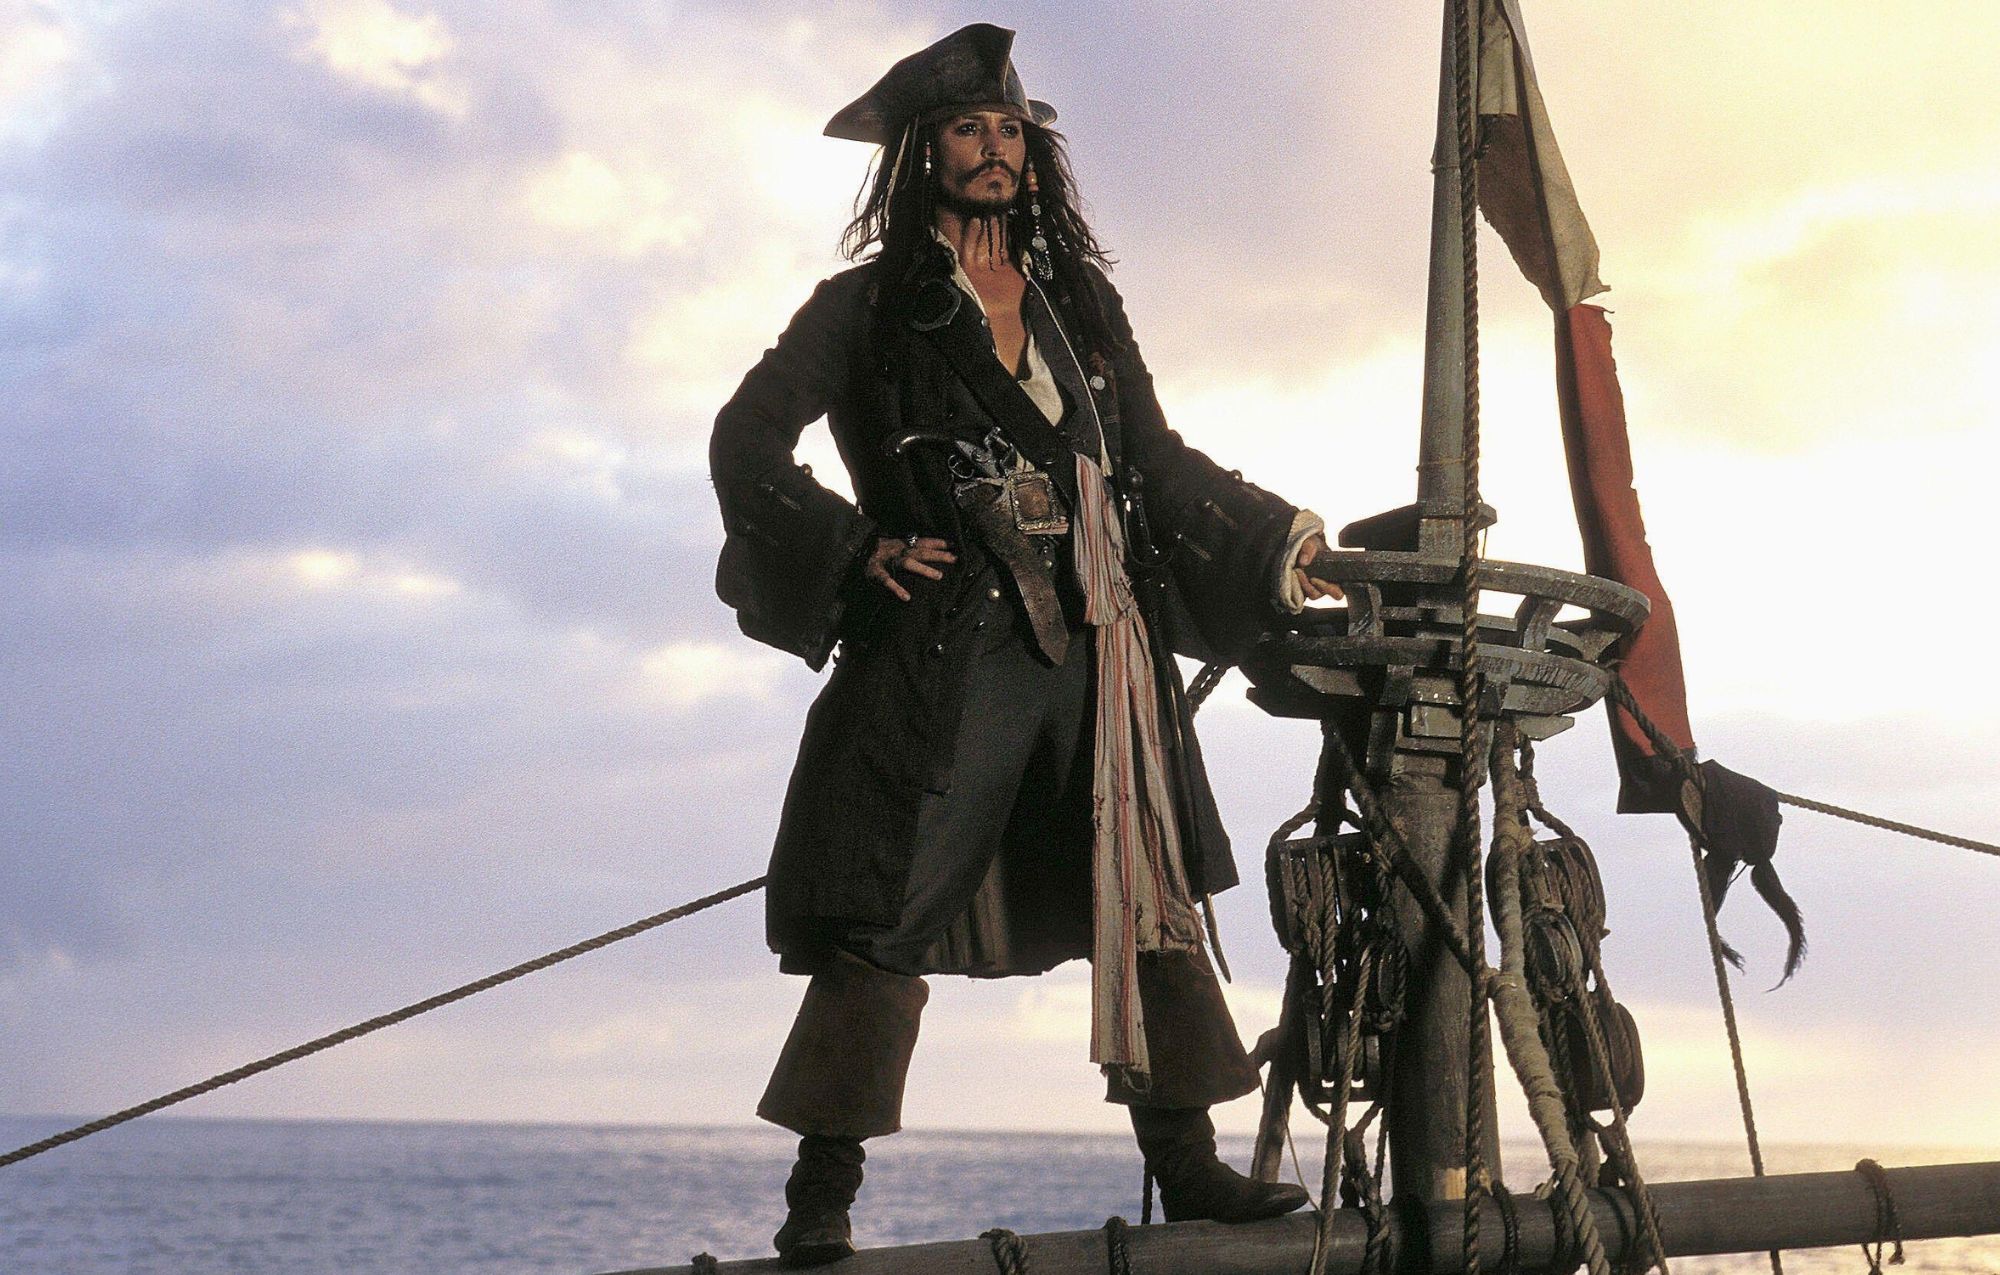 Is Johnny Depp Coming Back Latest Updates on Pirates of the Caribbean 6 and New Stars Joining the Adventure--